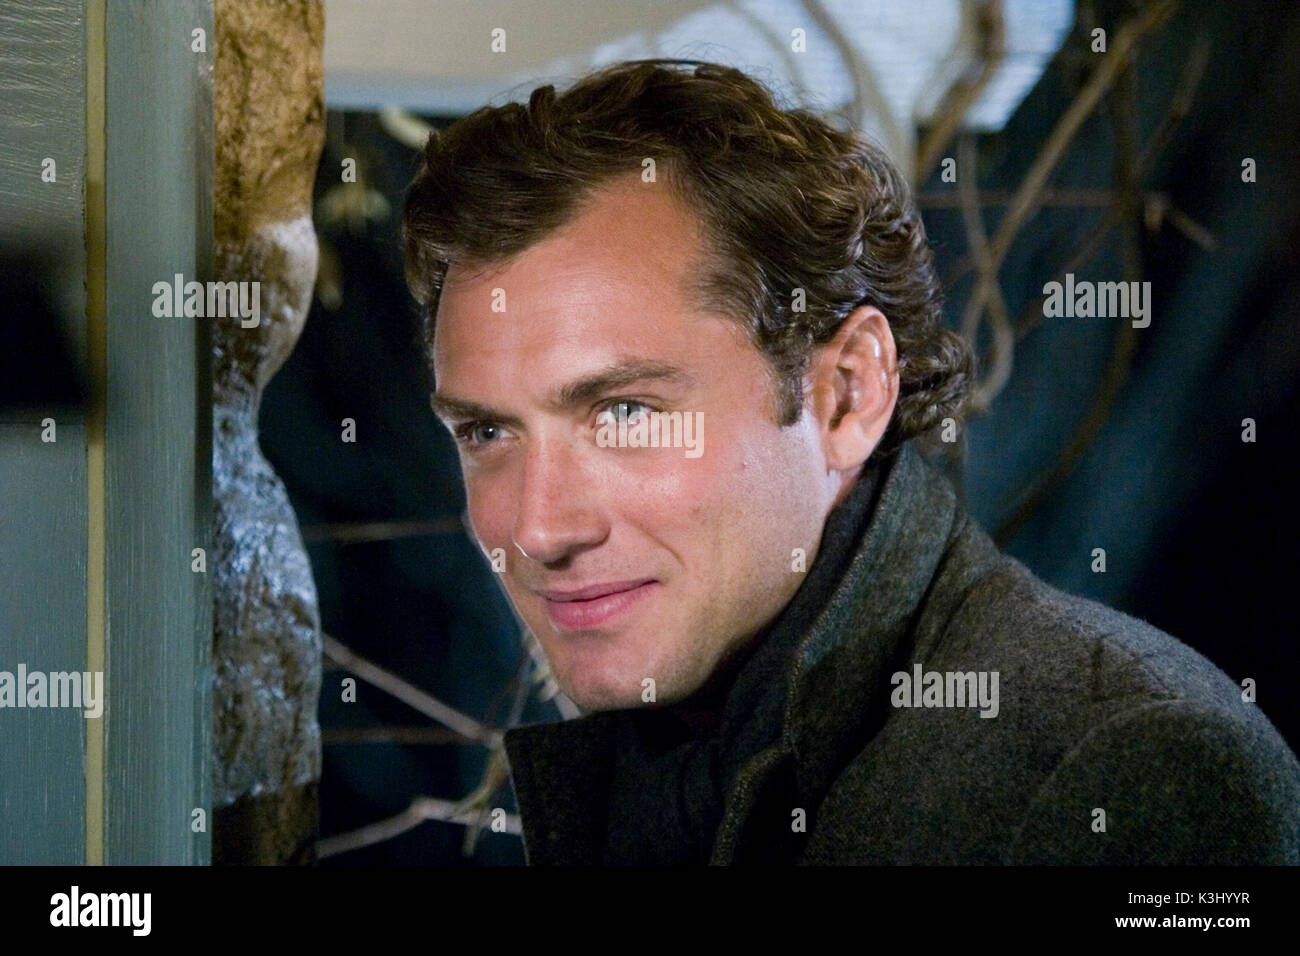 Jude Law stars in Columbia Pictures/Universal Pictures' romantic comedy The Holiday. THE HOLIDAY JUDE LAW Jude Law stars in Columbia Pictures/Universal Pictures romantic comedy The Holiday.     Date: 2006 Stock Photo